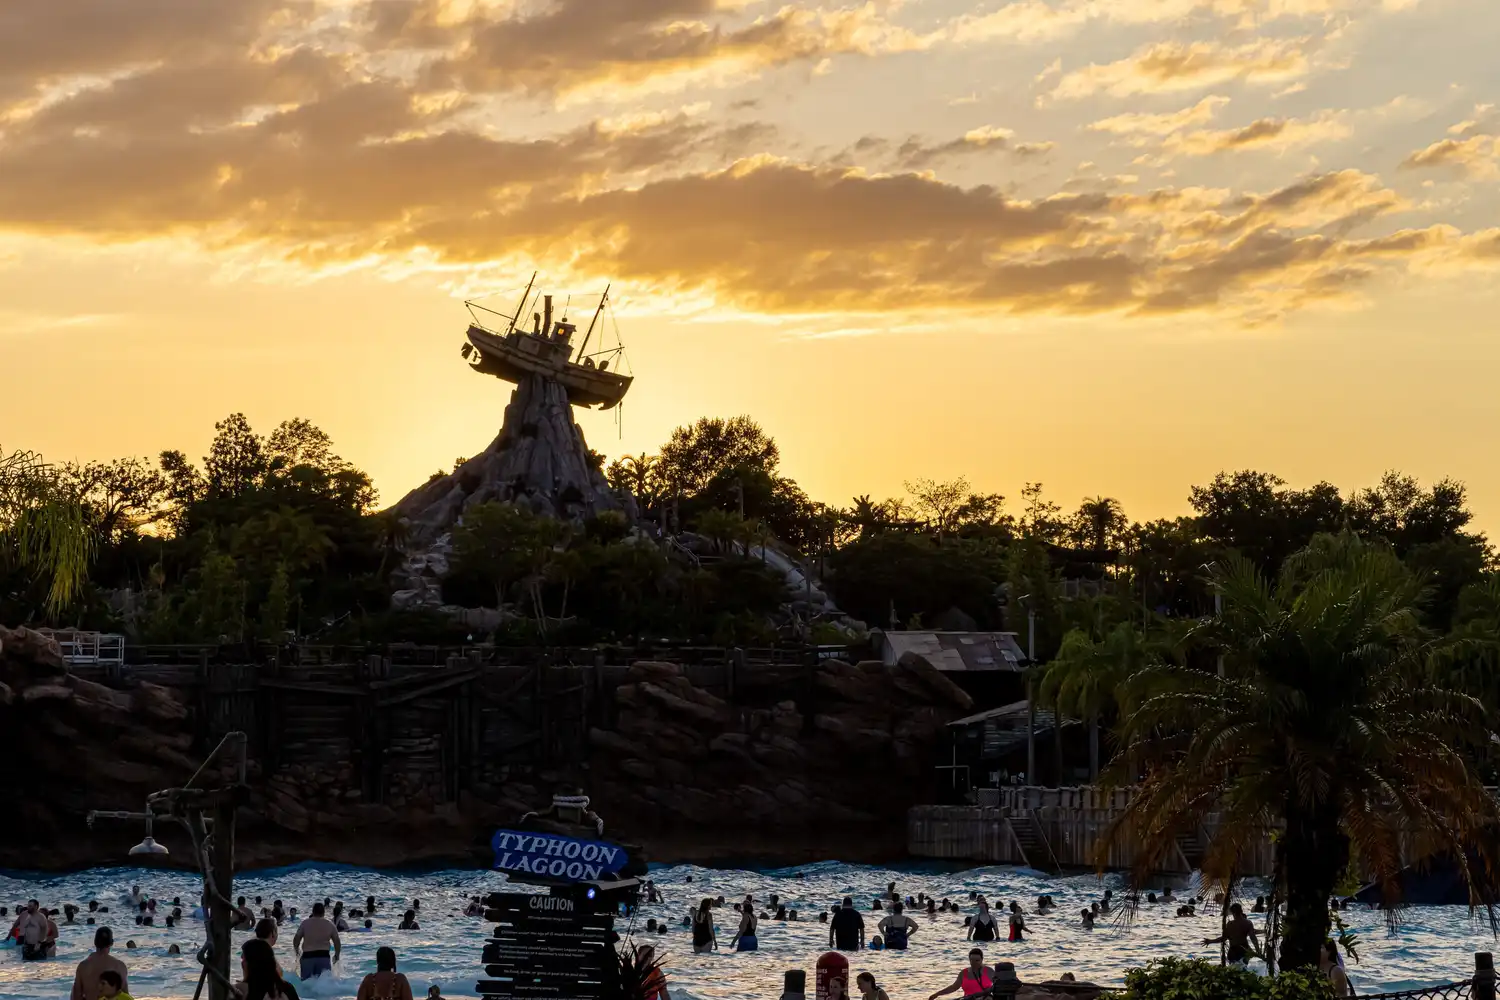 Typhoon Lagoon After Hours Event - Disney World Event